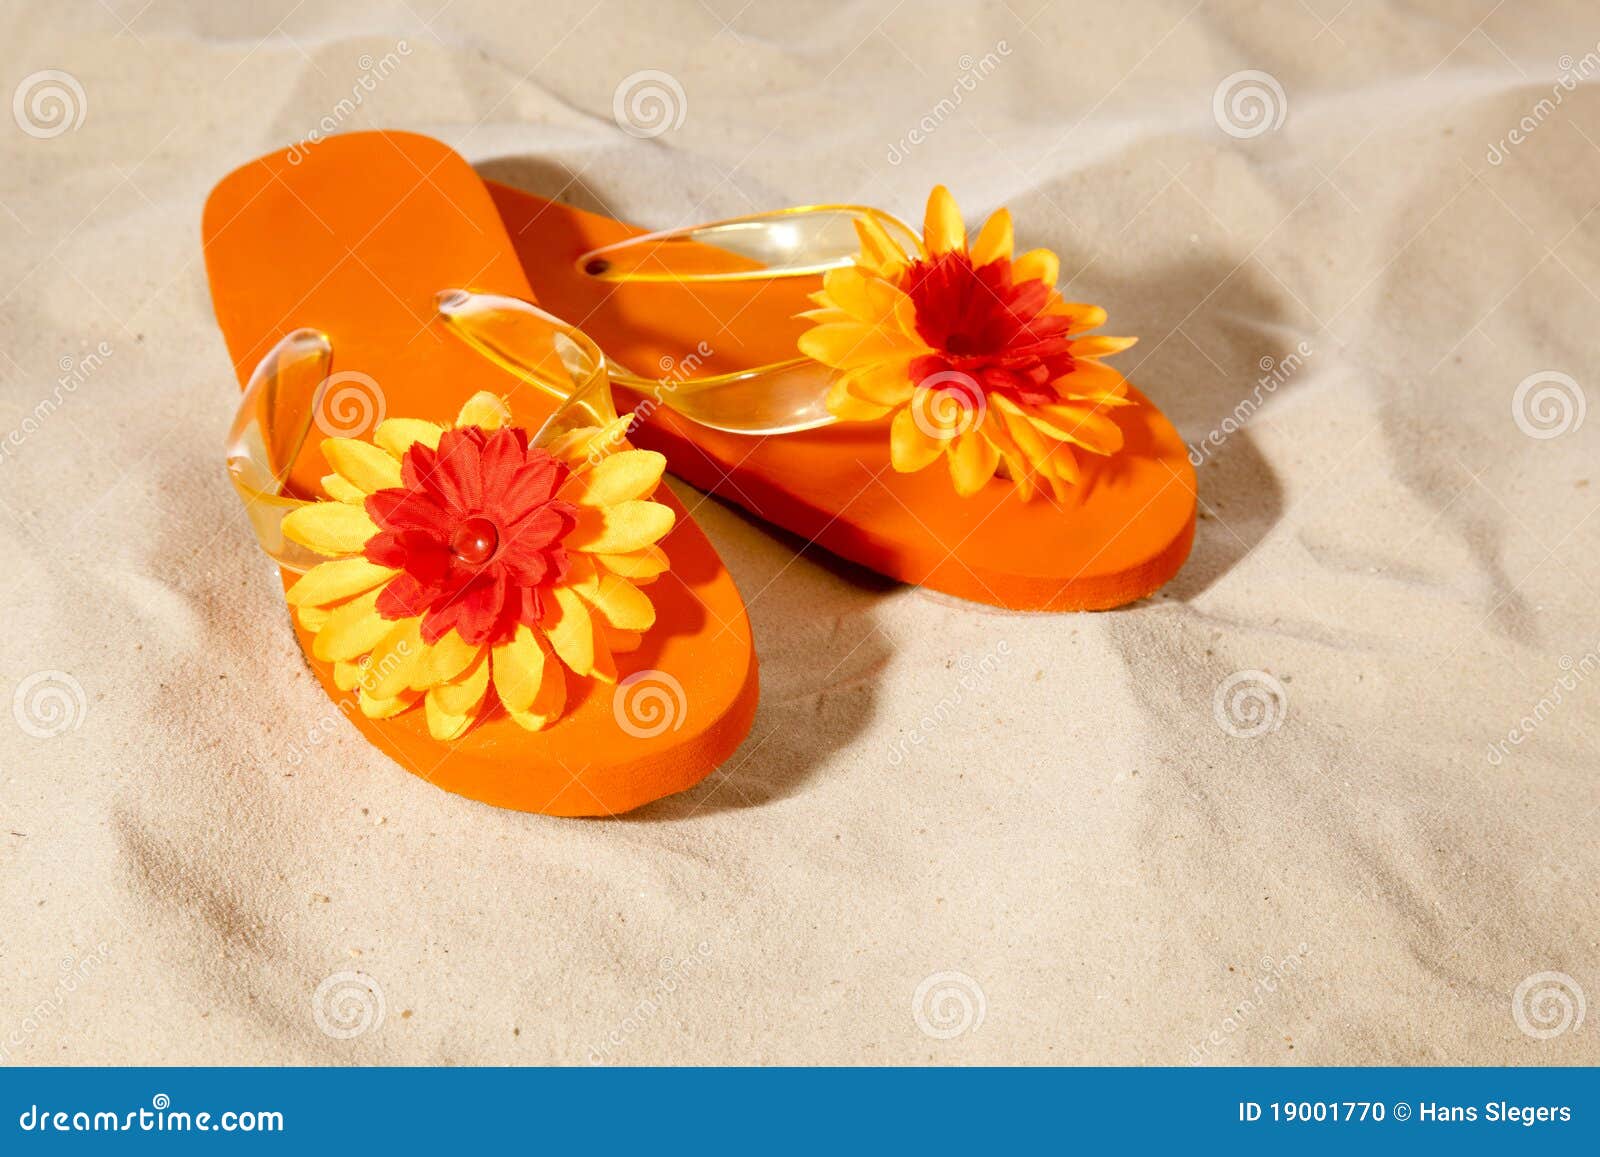 Flip-flops on the beach stock photo. Image of objects - 19001770